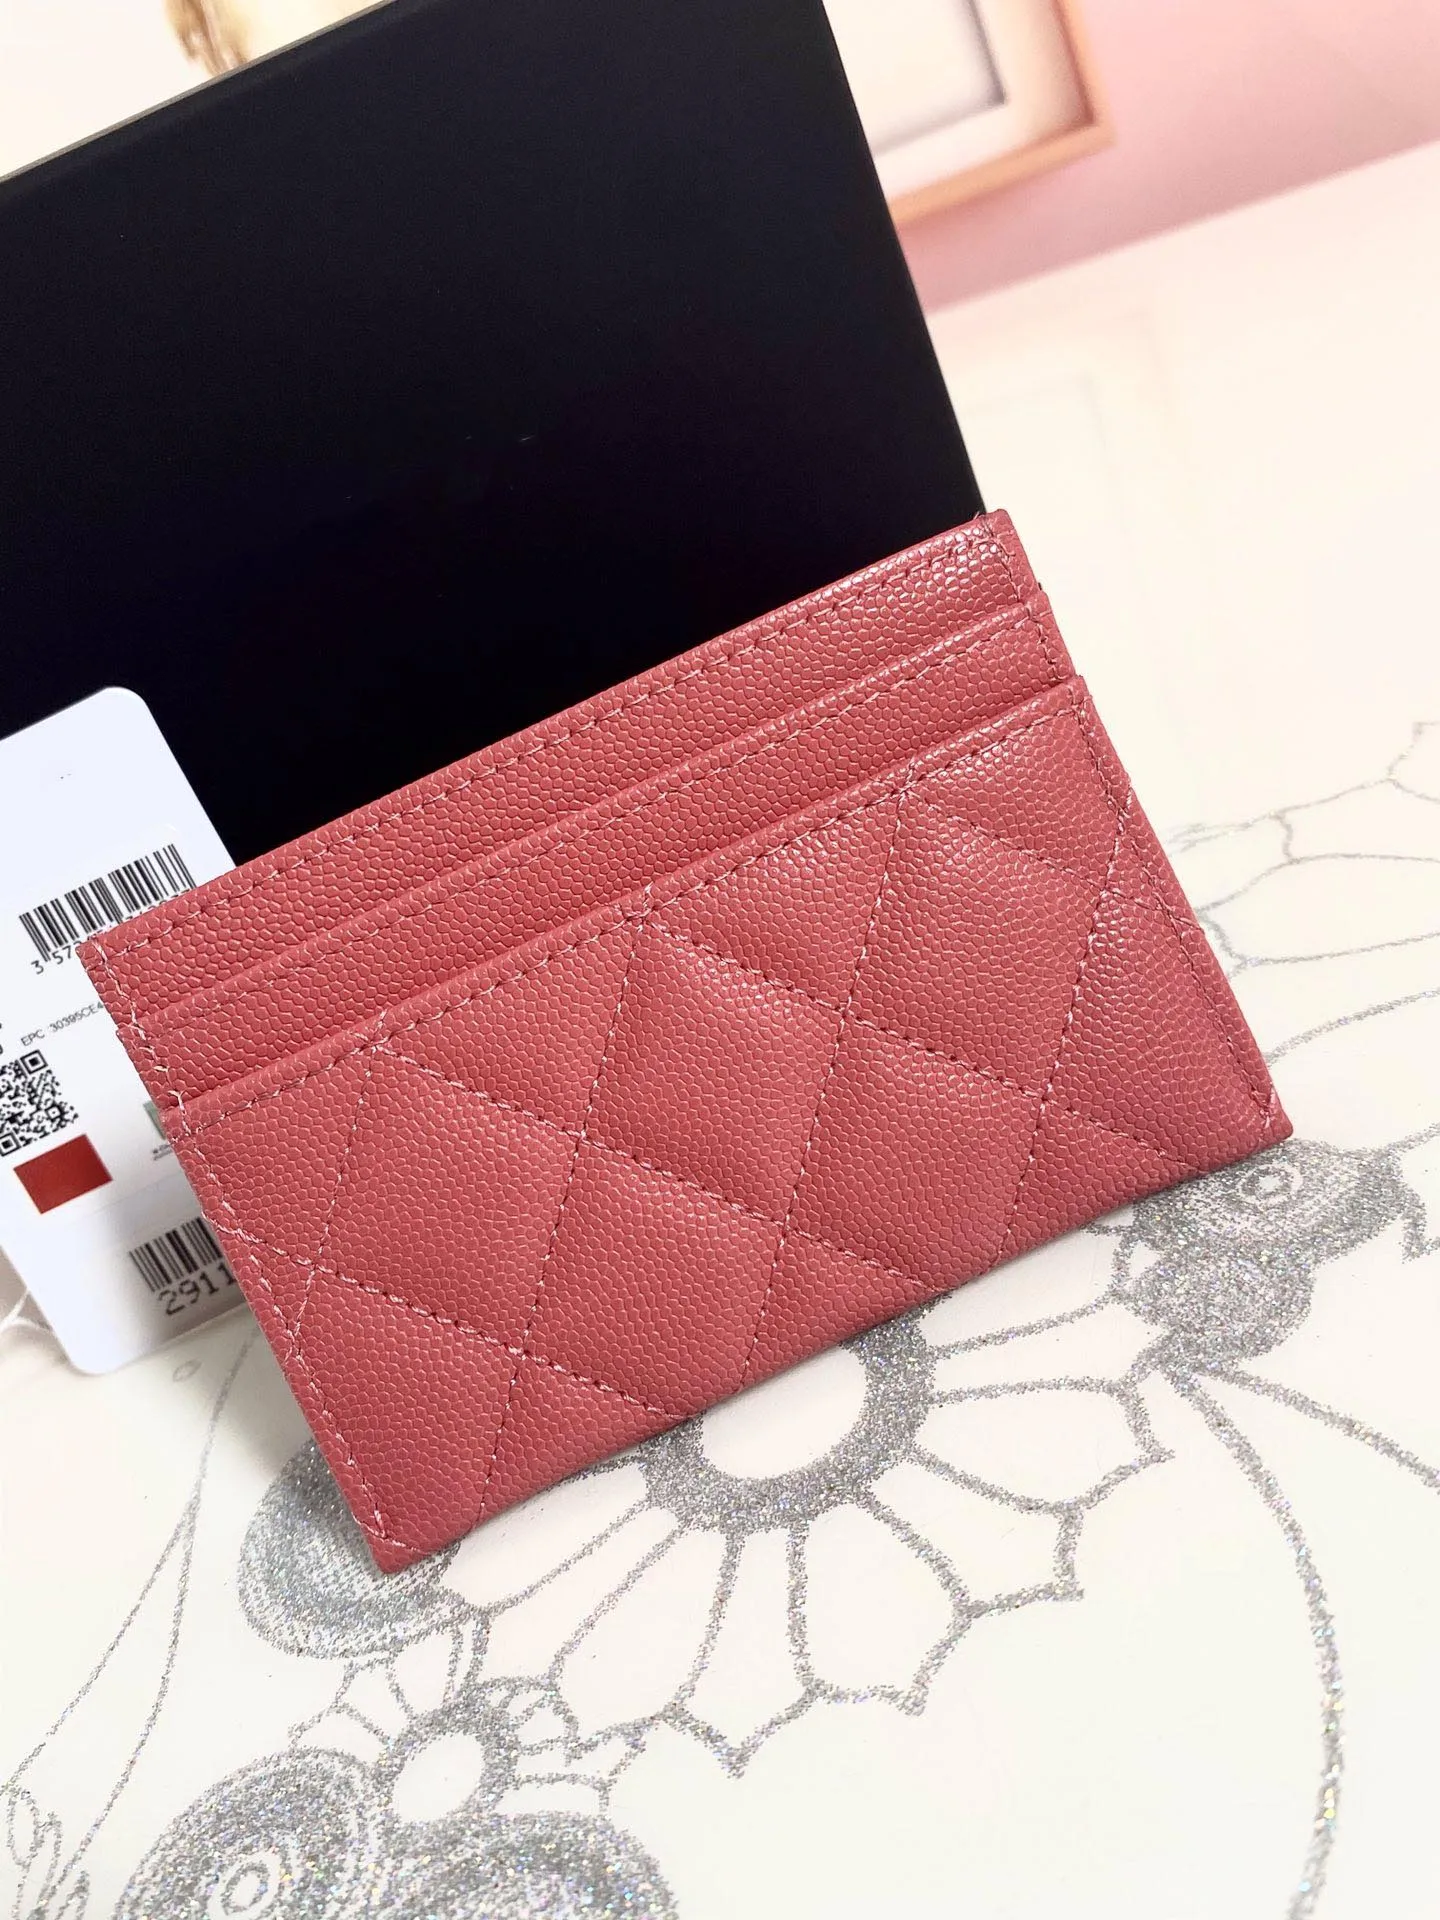 2020 luxury fashion new Credit Card Cardholder wallet real leather bank card wallet business ID Card Cardholder